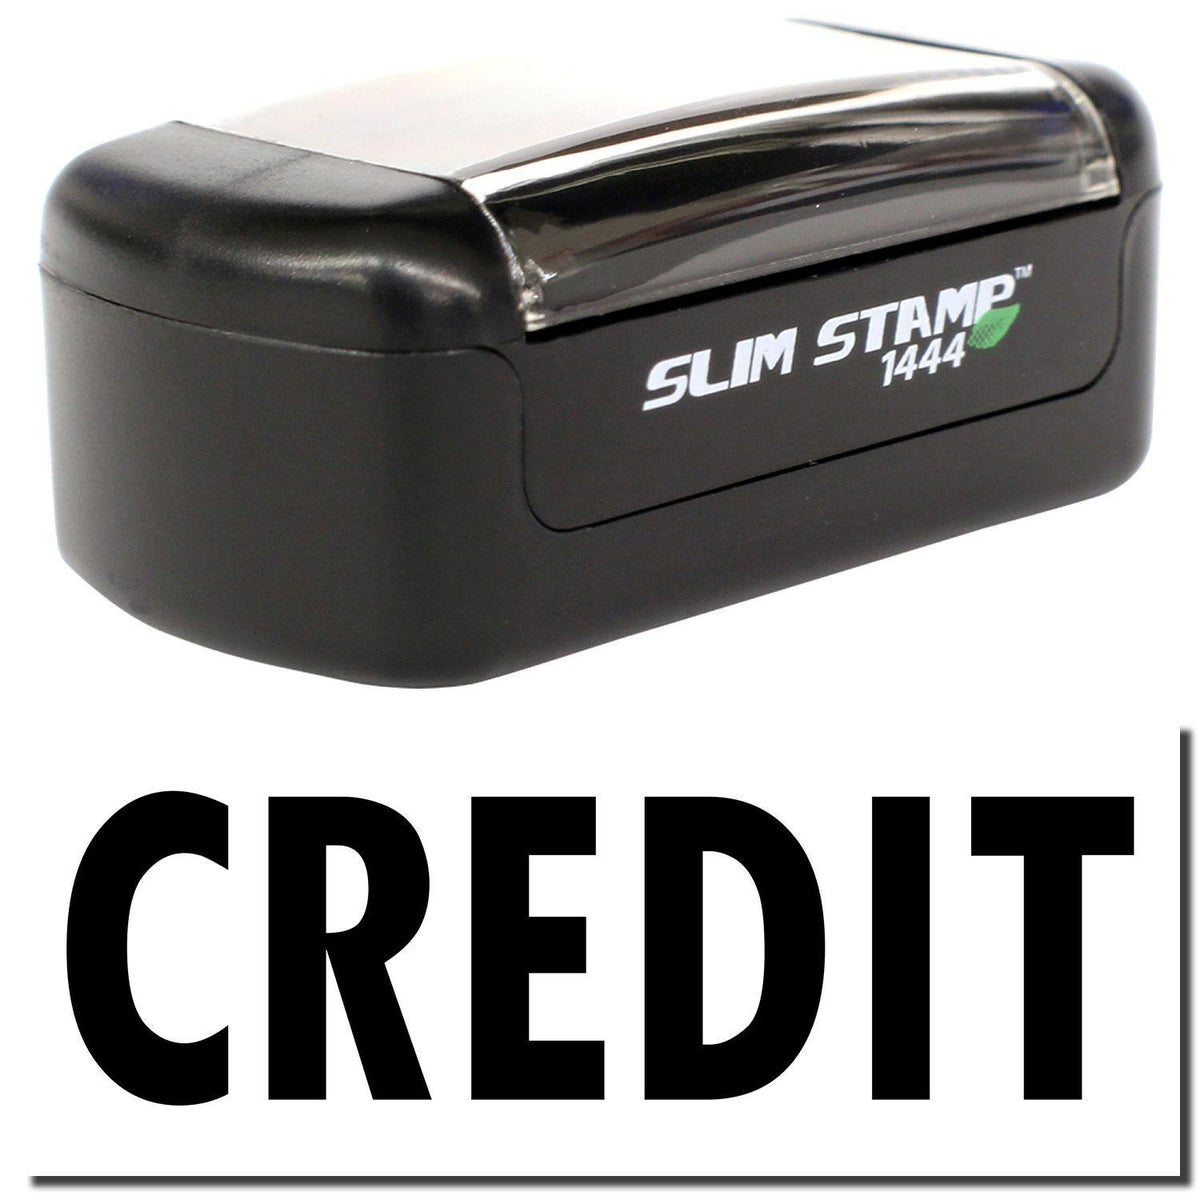 A stock office pre-inked stamp with a stamped image showing how the text &quot;CREDIT&quot; is displayed after stamping.